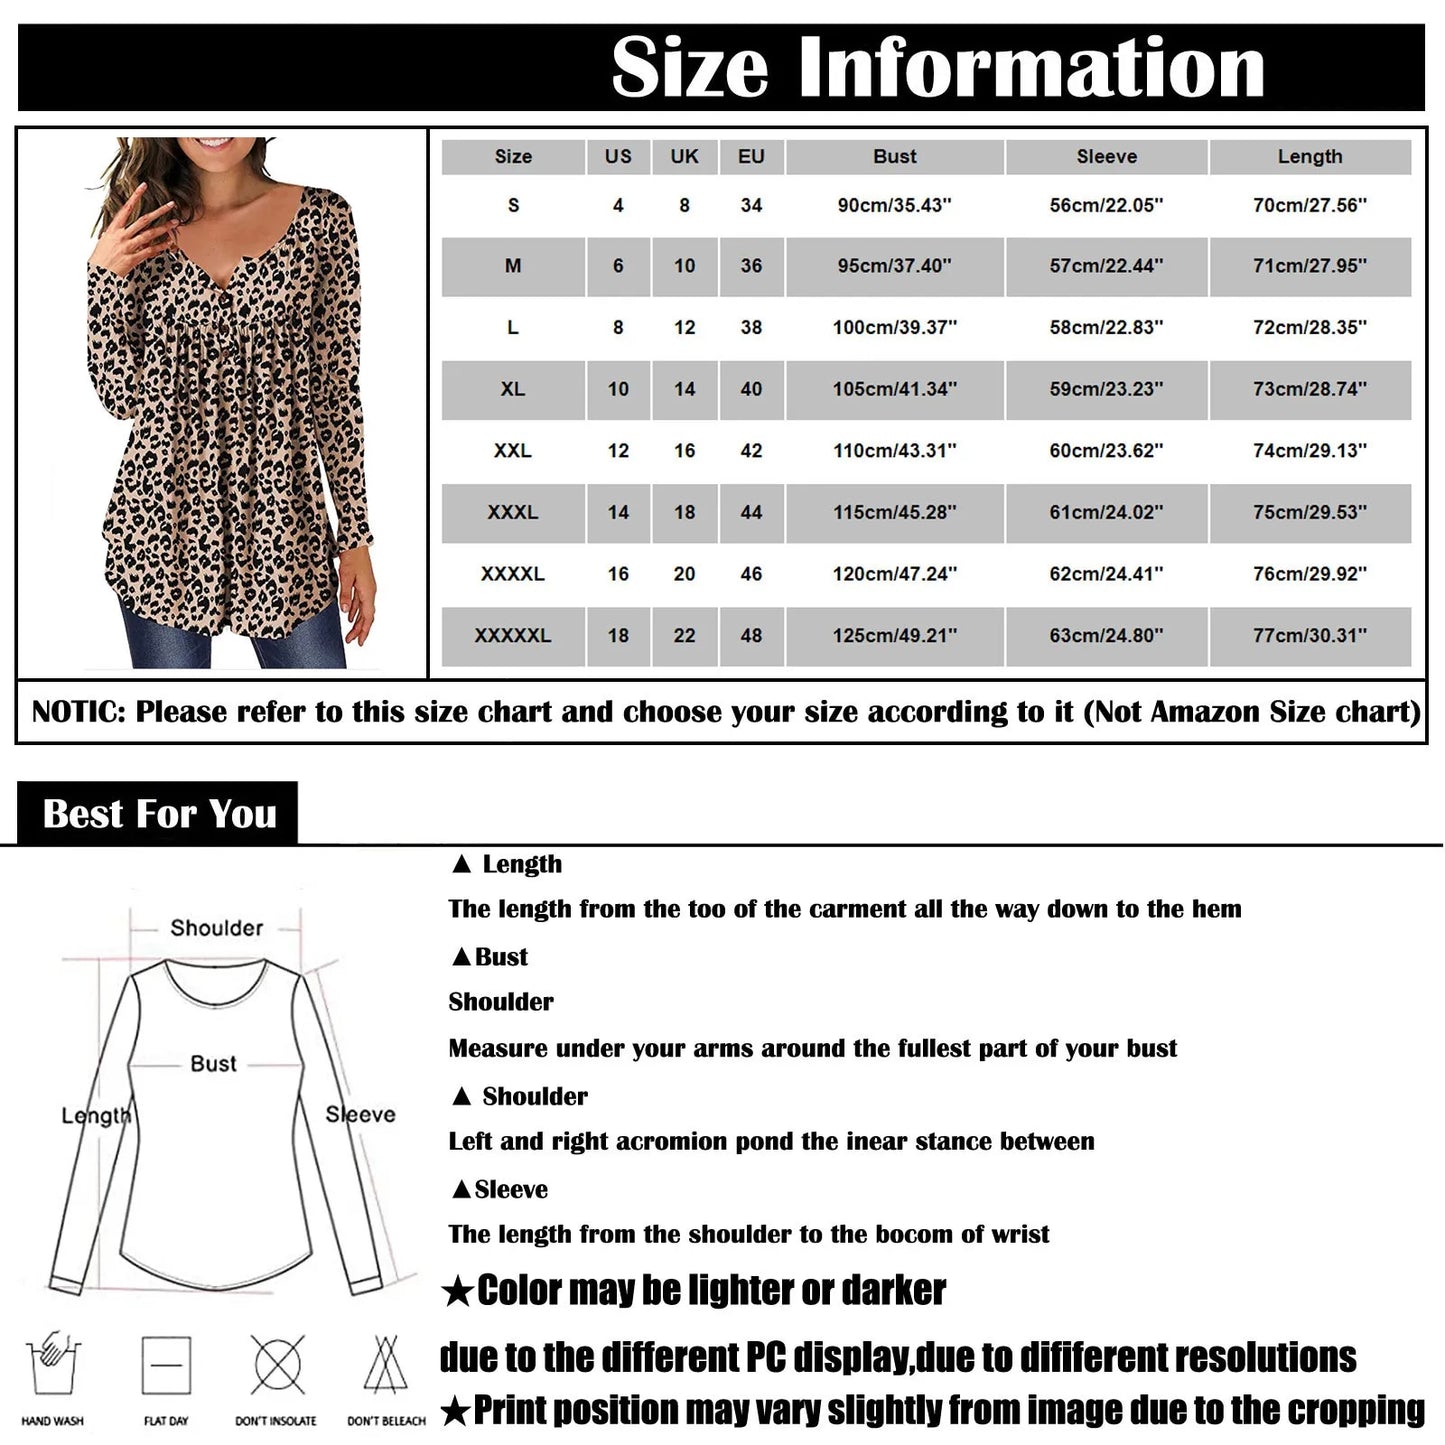 Women's printed Casual Button Blouse with Long Sleeves